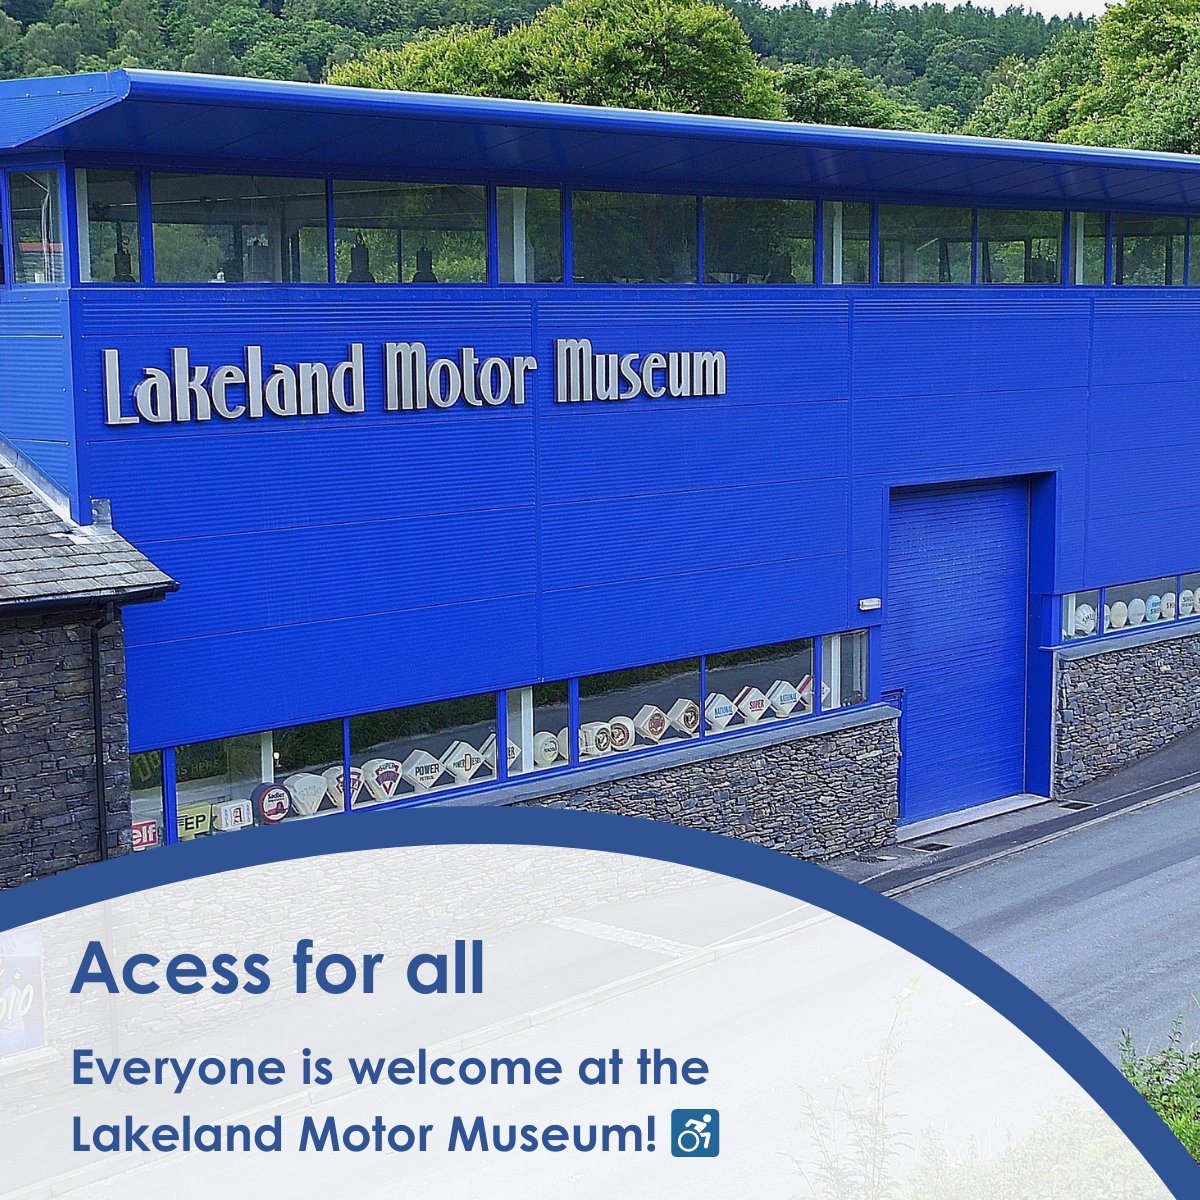 #LakelandMotorMuseum welcomes everyone!  ♿️ Easy access, clear signage, lift & more for a comfortable visit. Explore motoring history at your own pace!  

#AccessibleForAll